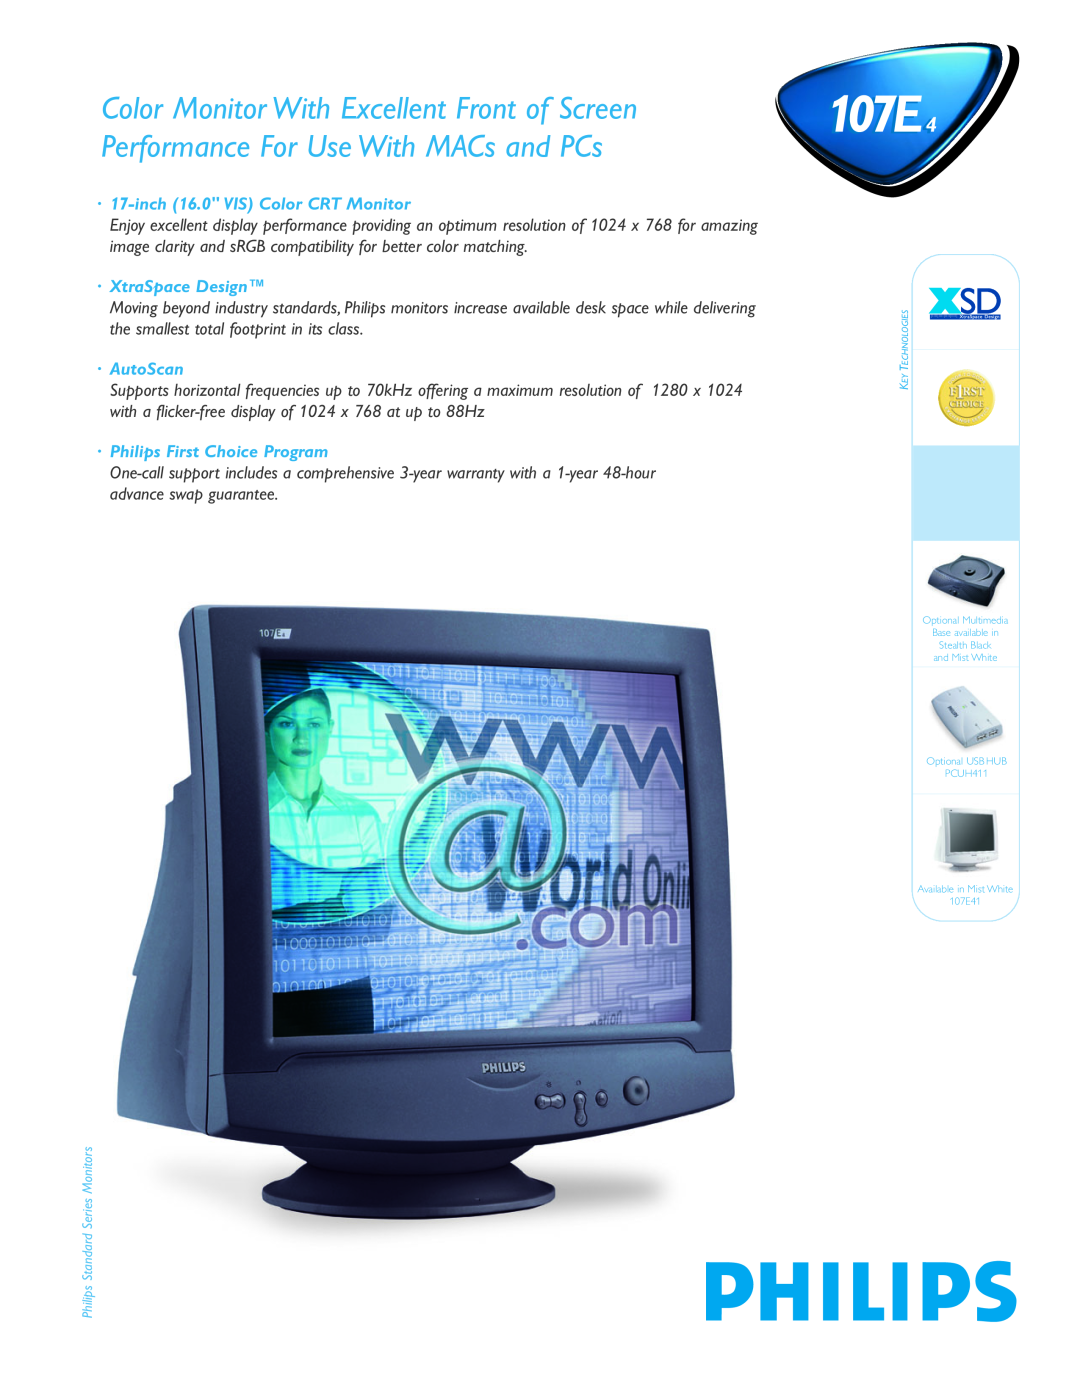 Philips 107E4 warranty ·17-inch16.0 VIS Color CRT Monitor, ·XtraSpace Design, ·AutoScan, ·Philips First Choice Program 